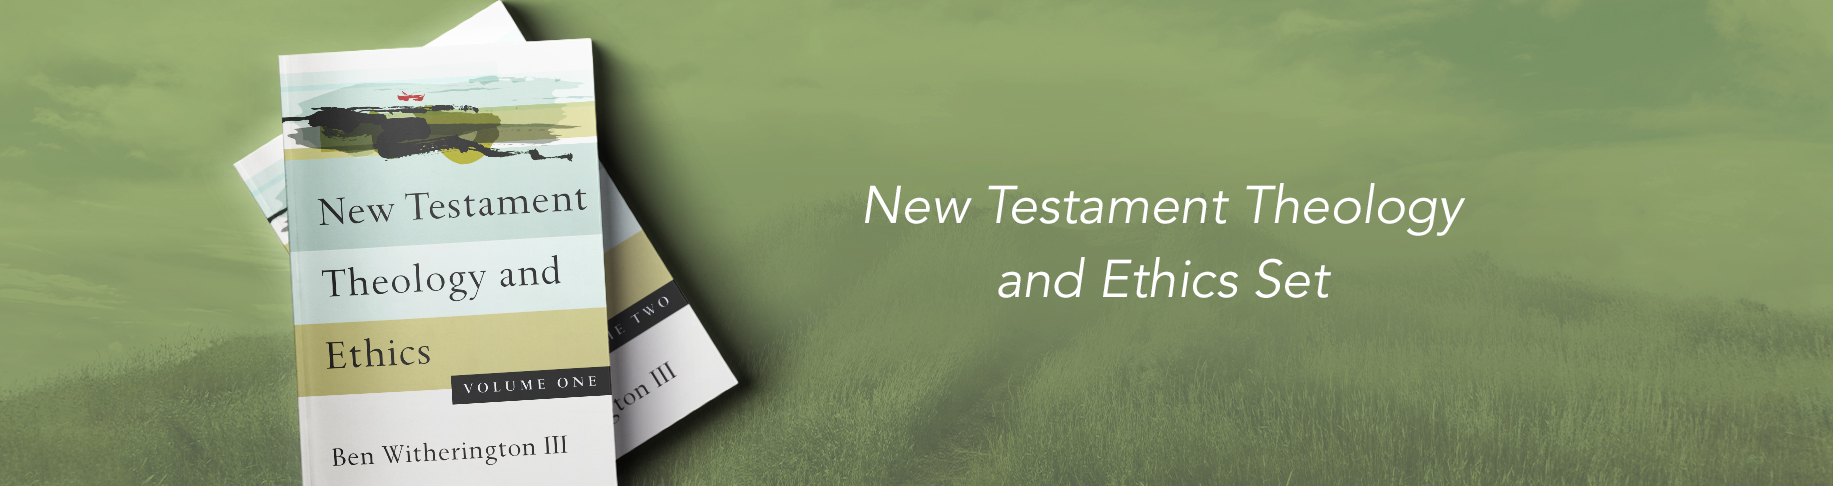 New Testament Theology and Ethics Set